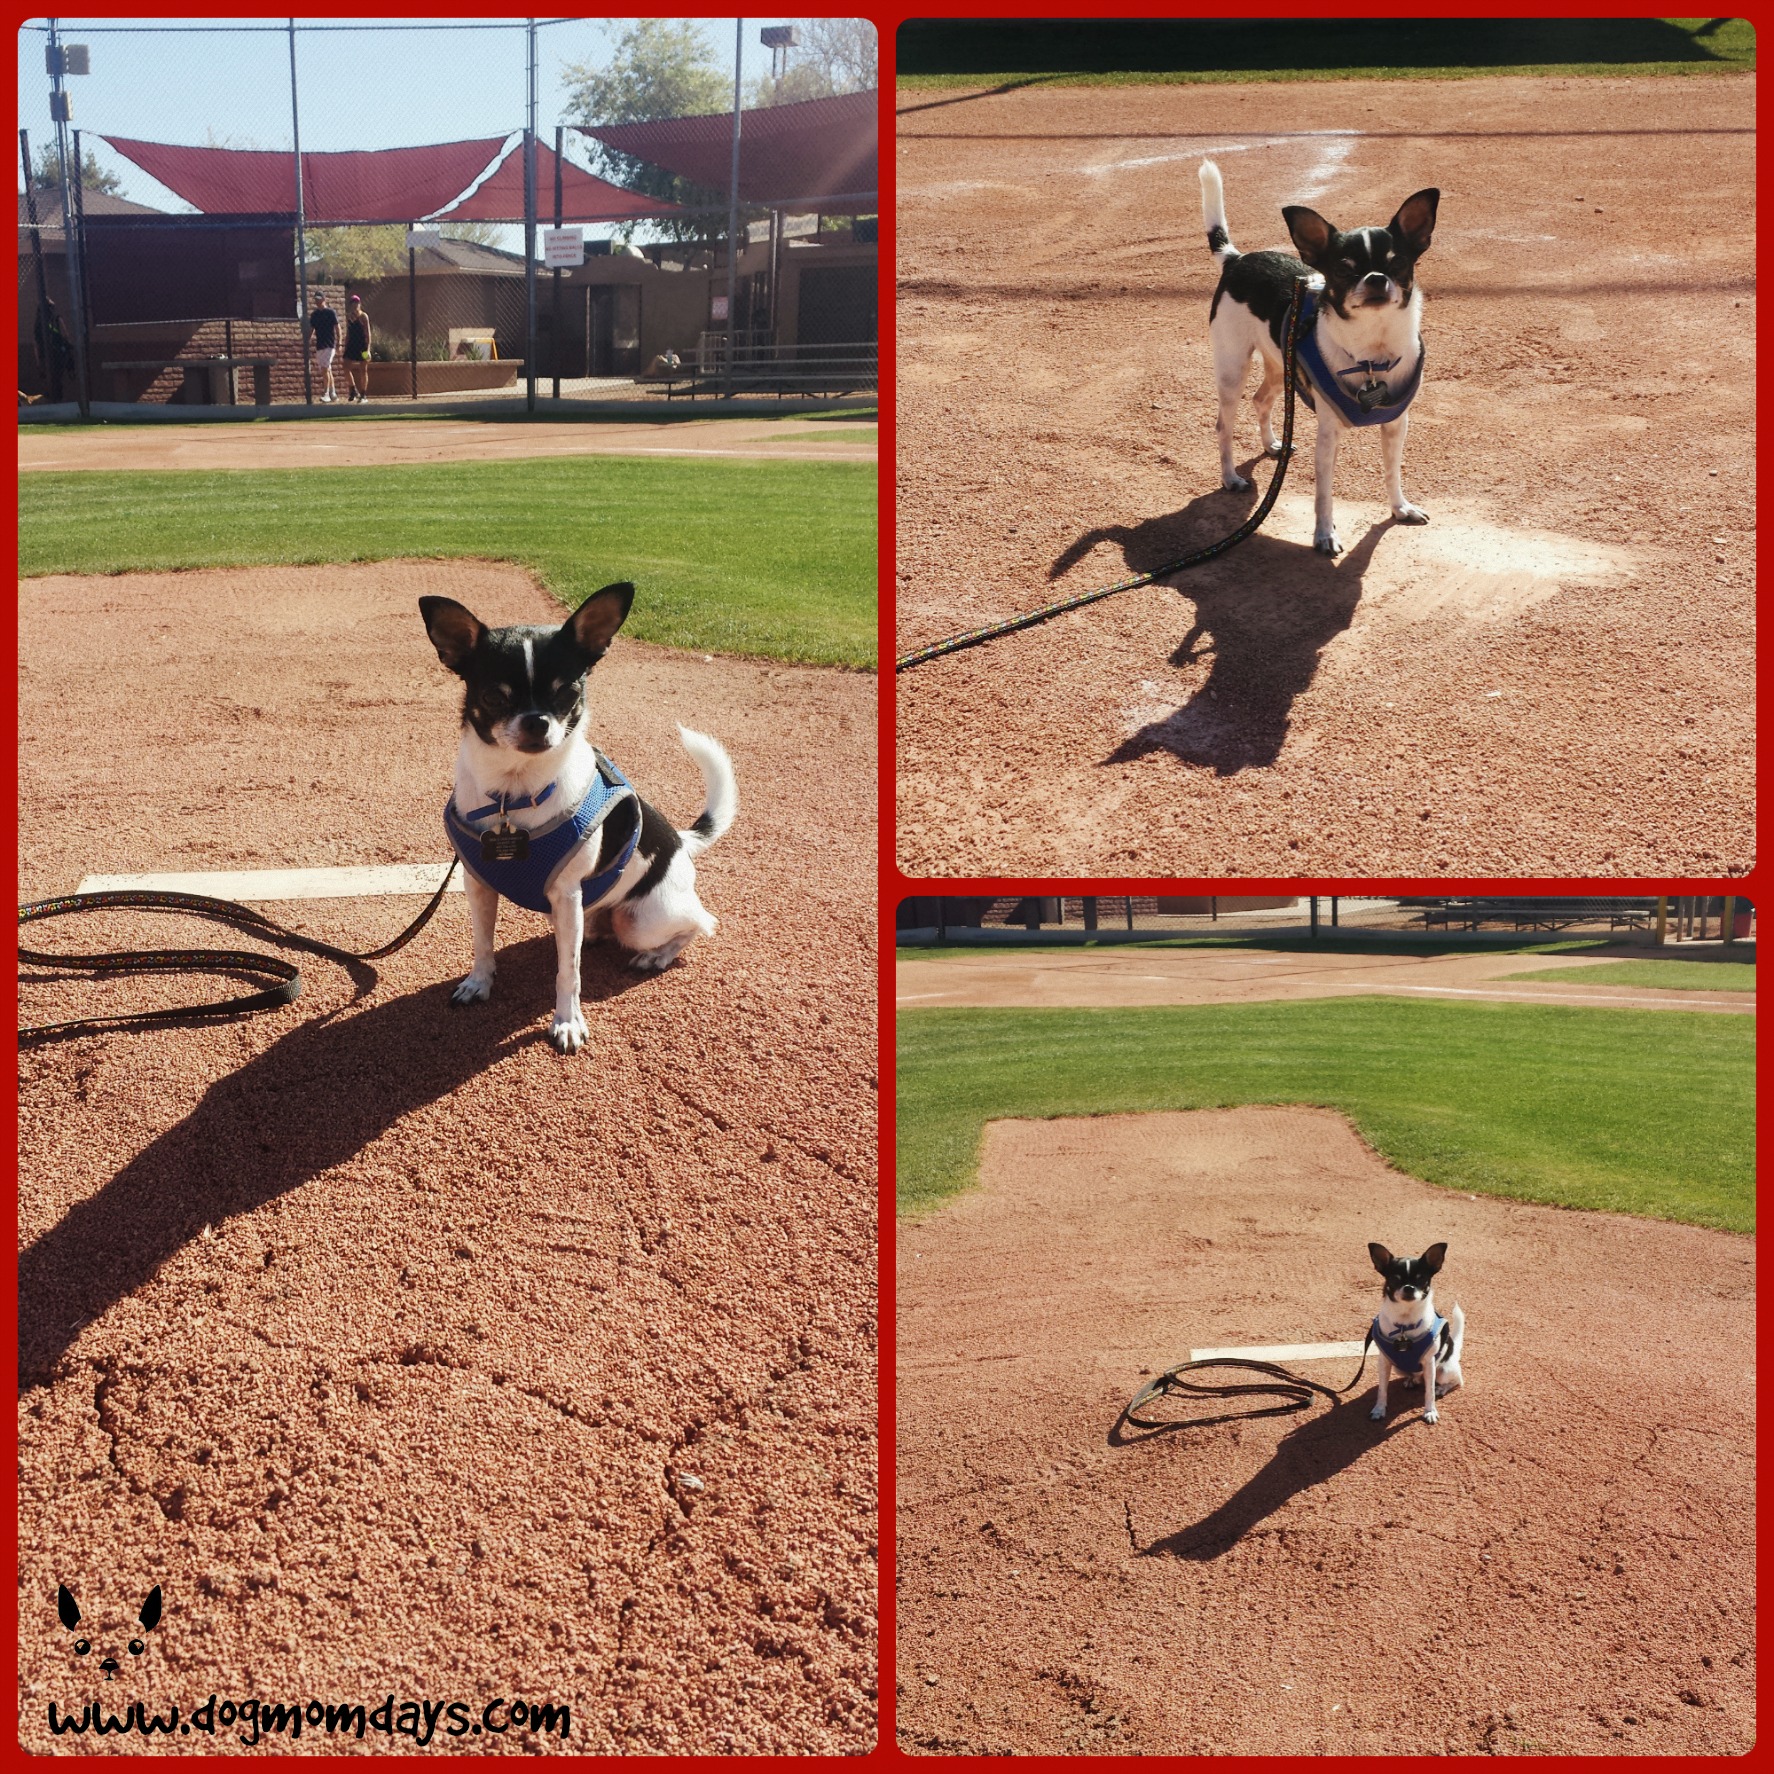 Wynston posing on the baseball mound! The dog show took place on a baseball field. 